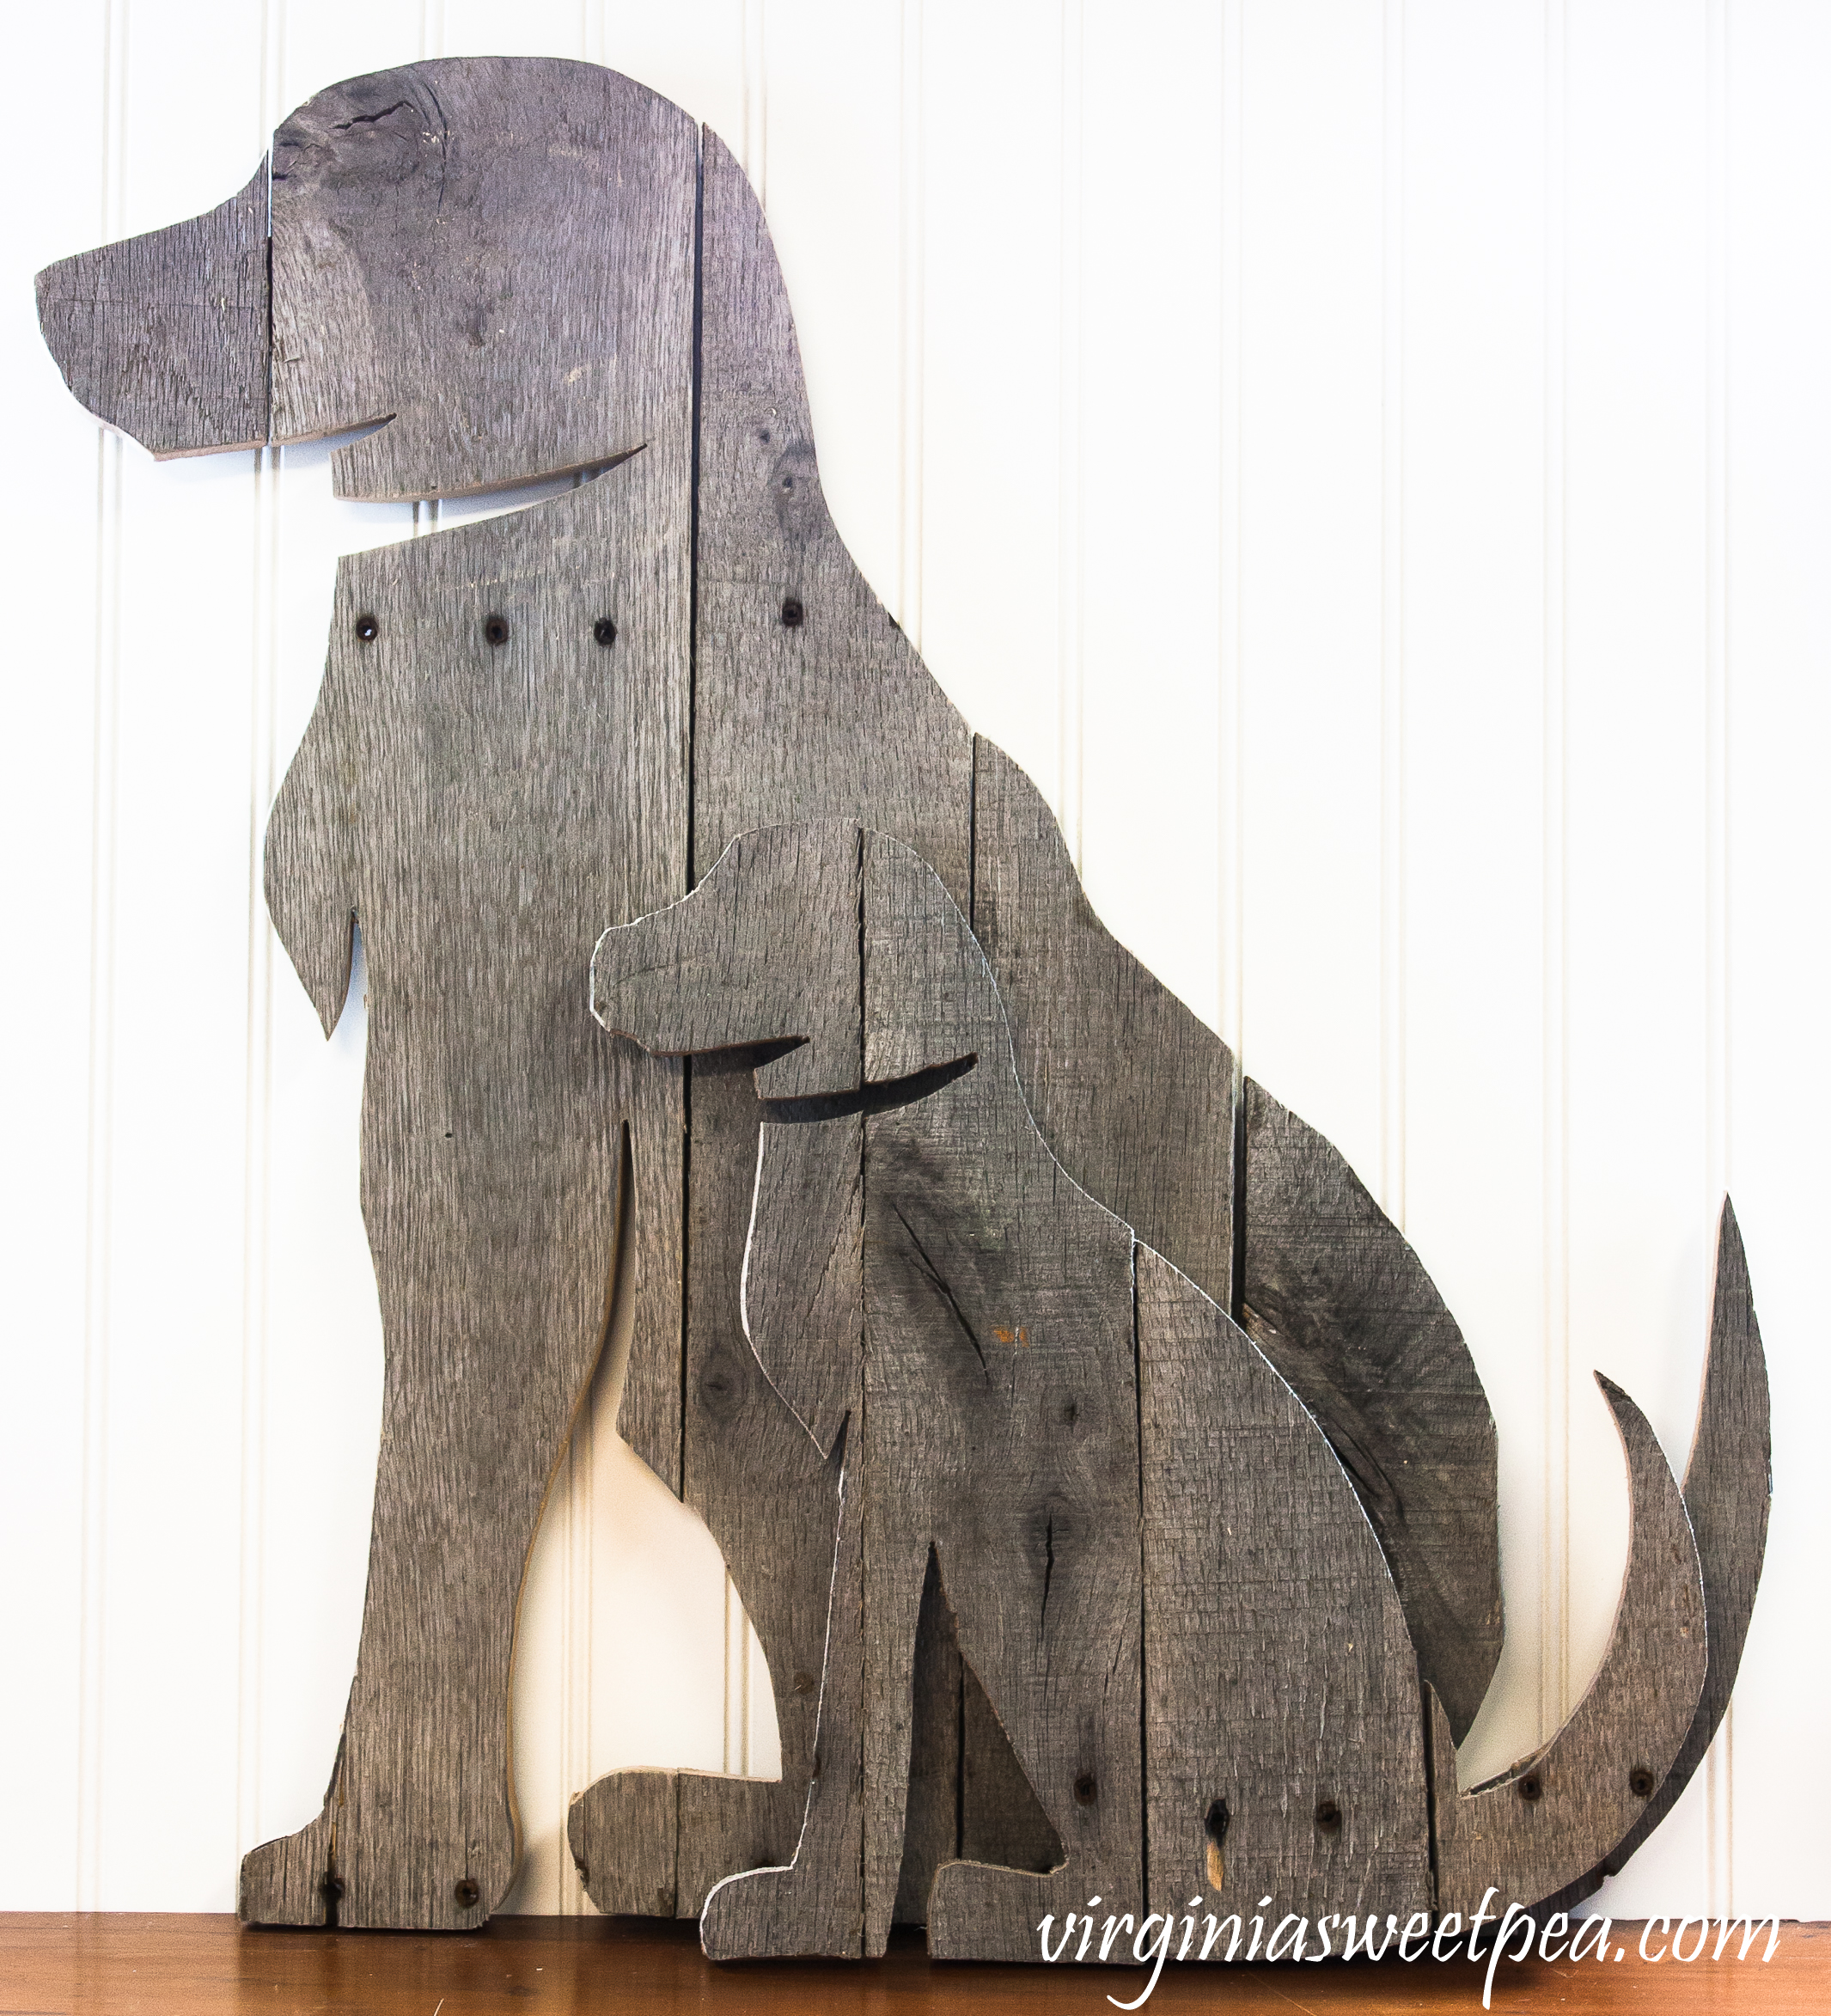 Wooden Pallet Coasters - One Dog Woof